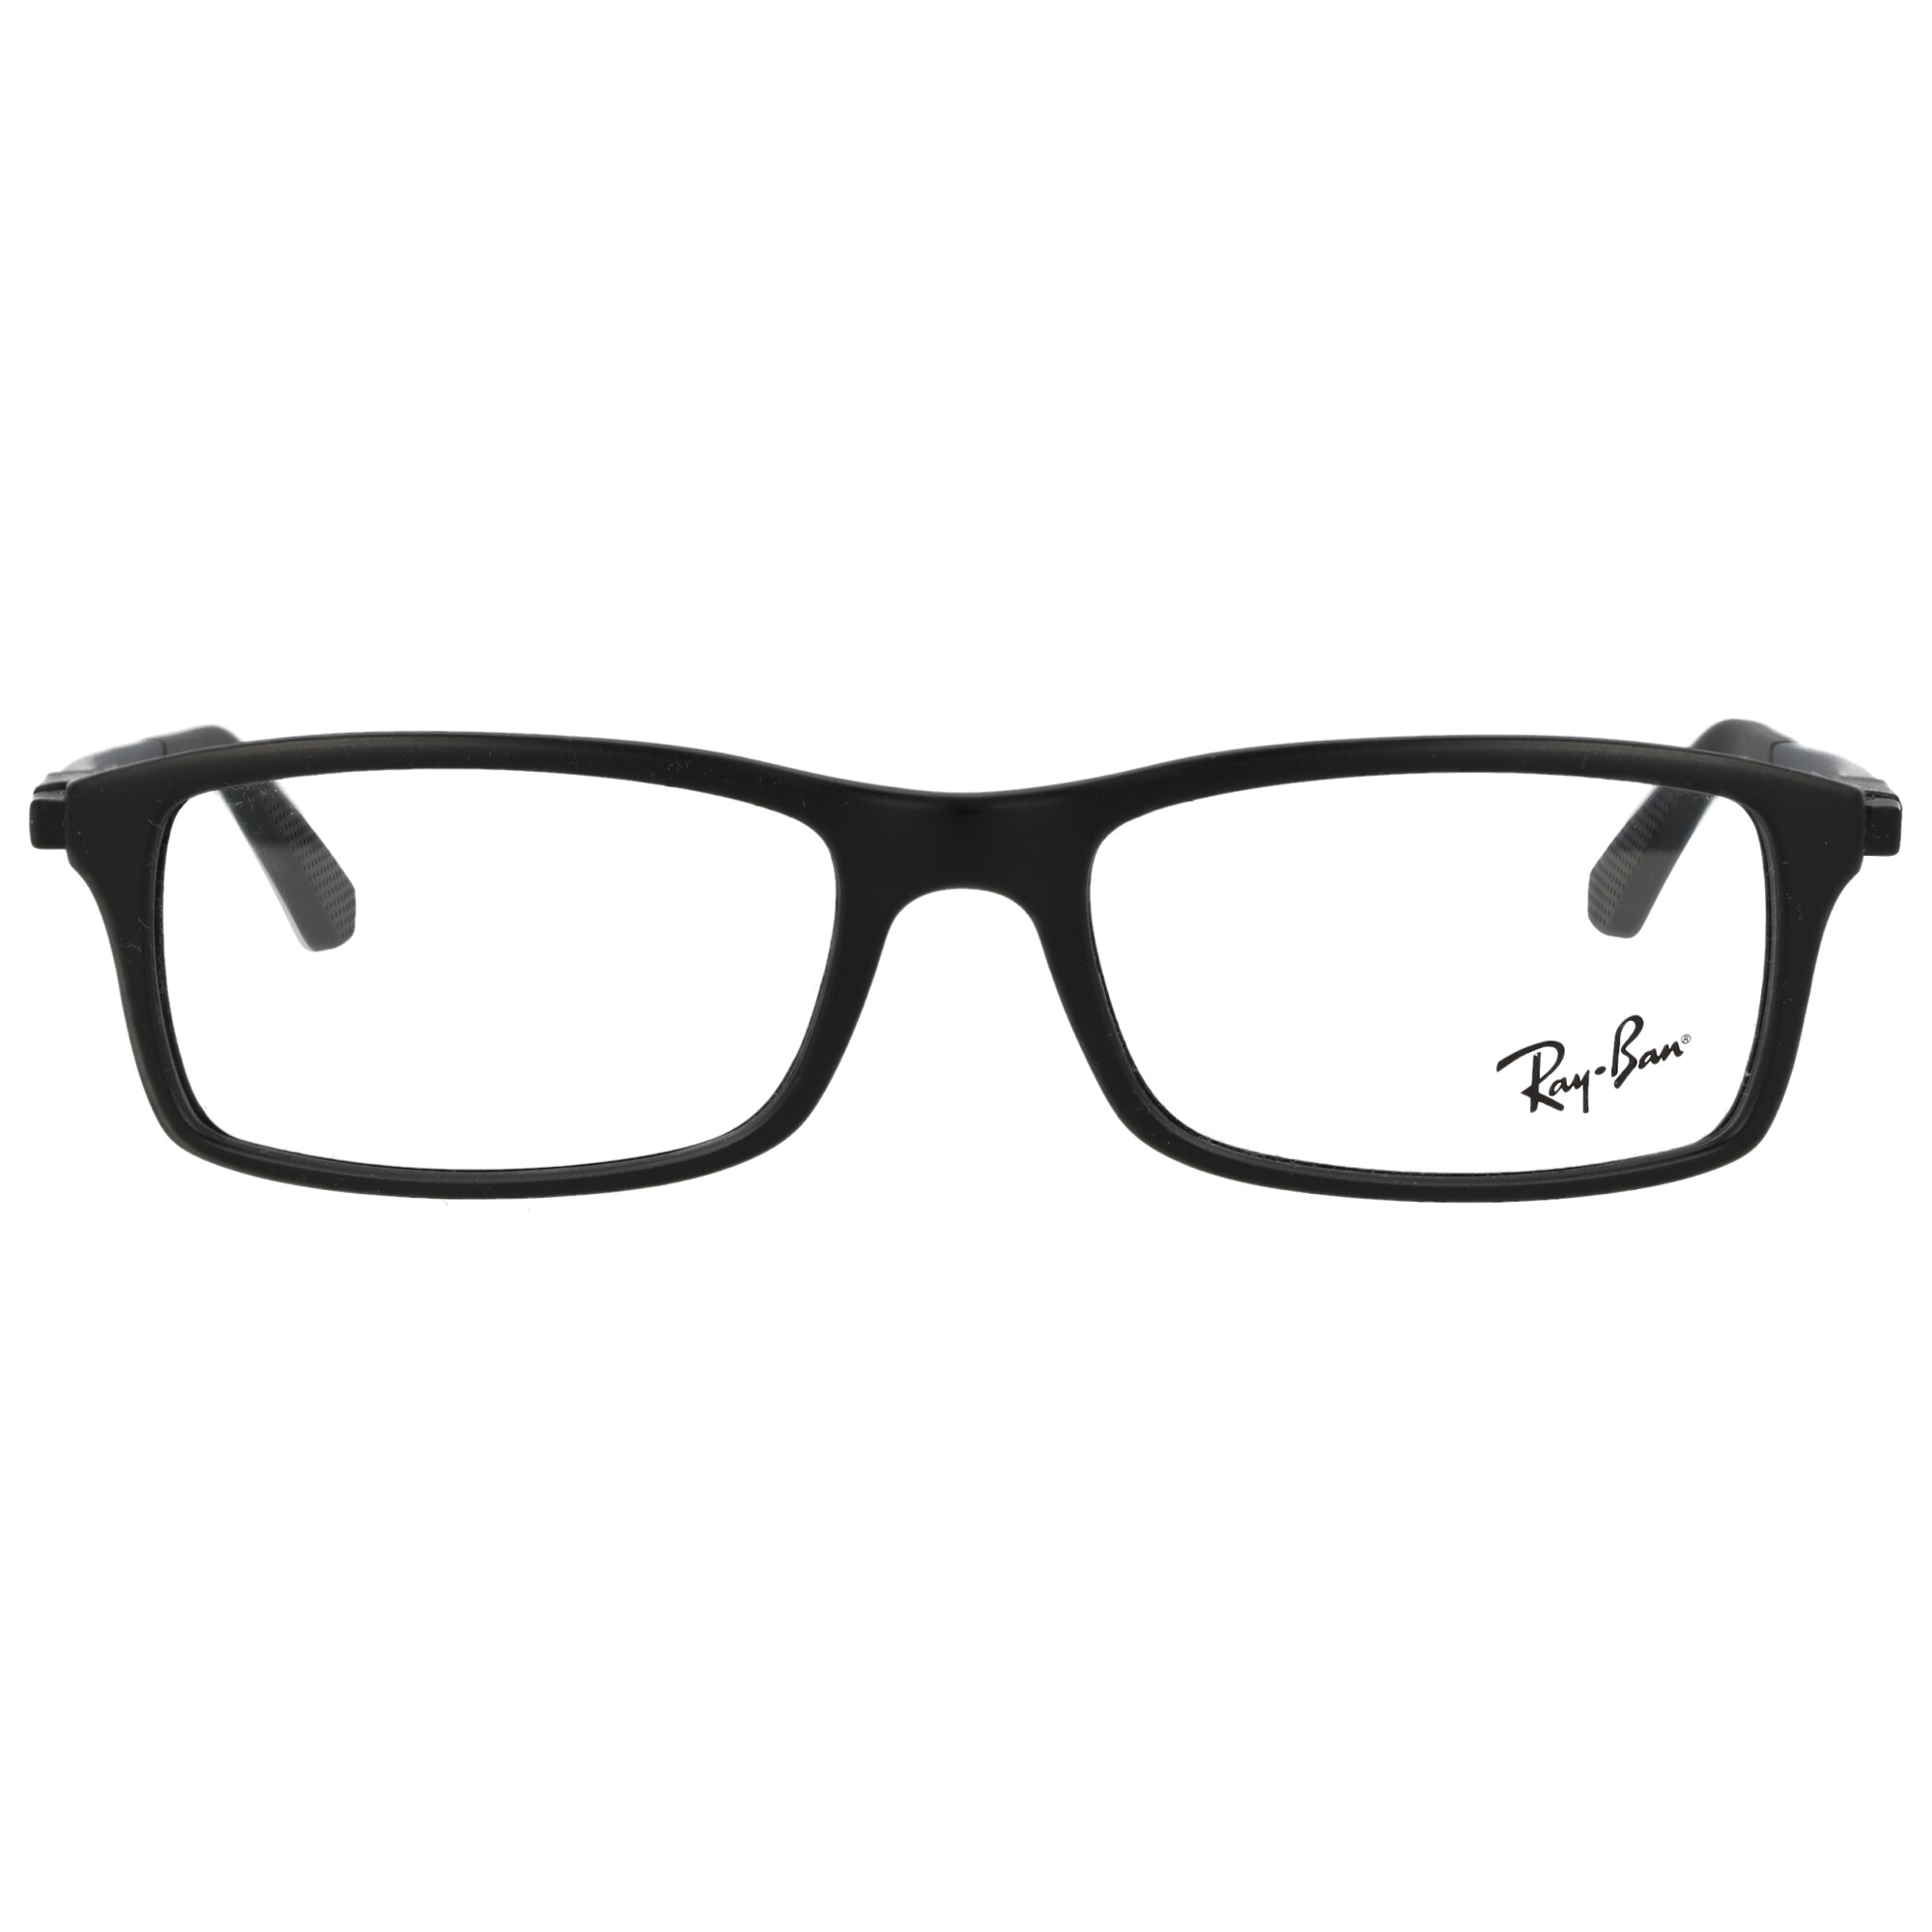 Ray Ban Rb 7017 5196 Exclusive Rd